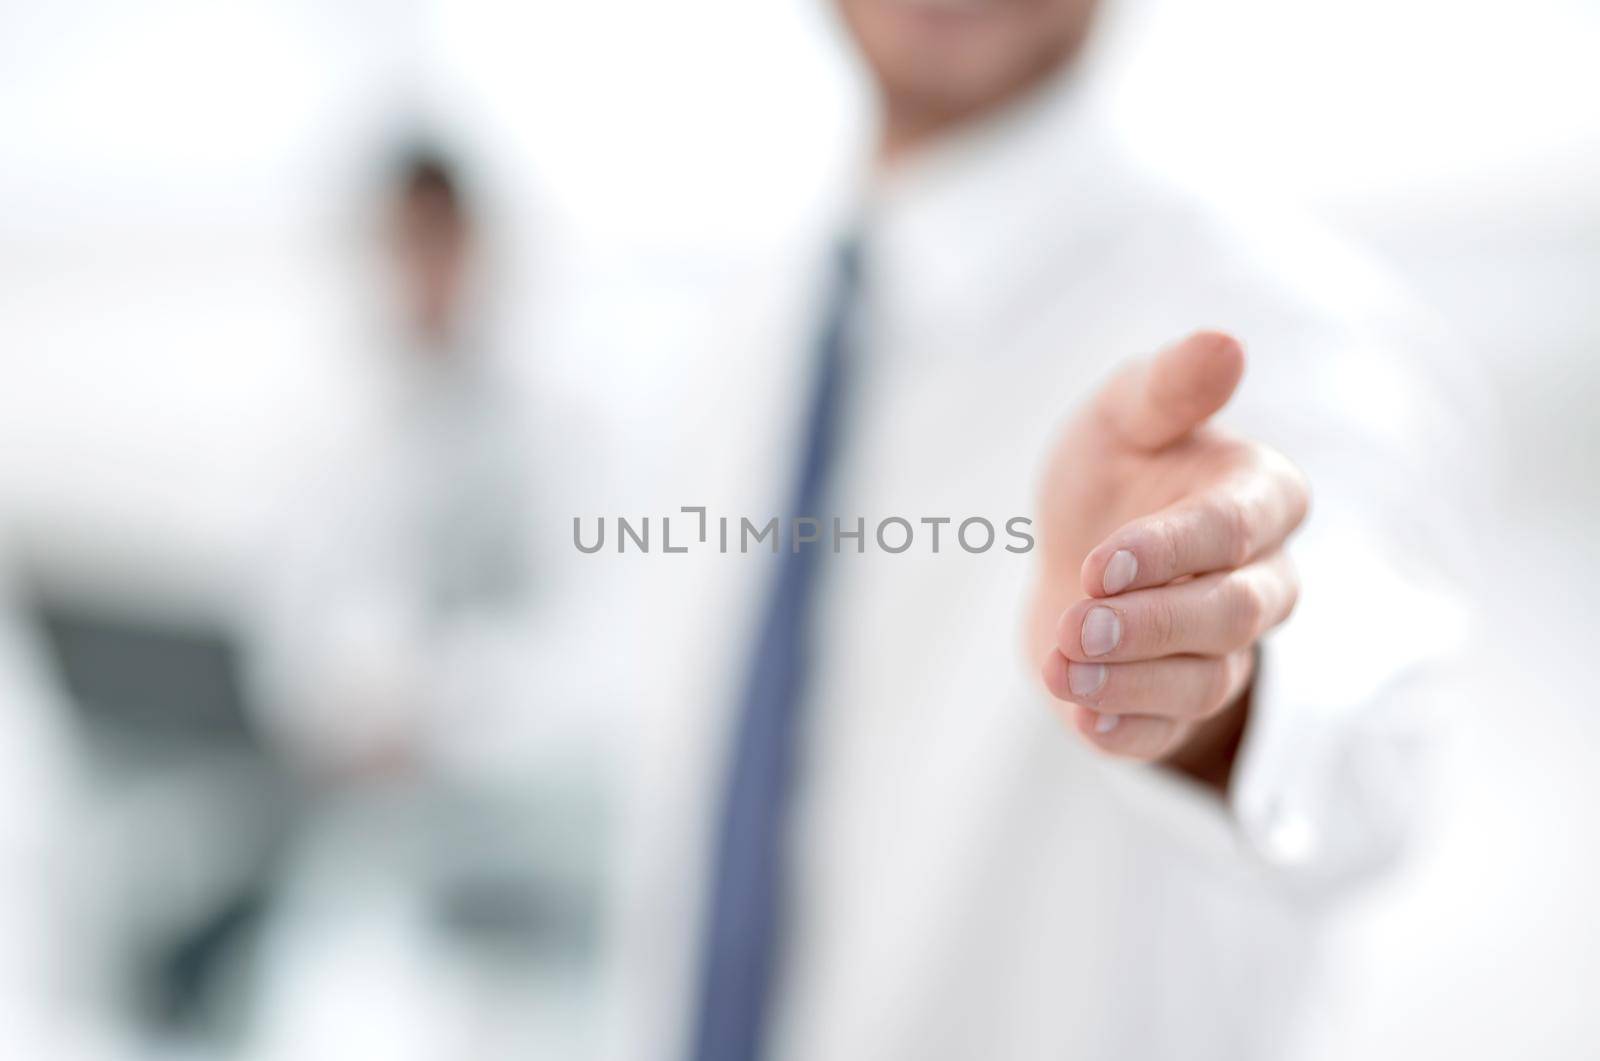 blurred image. business man holding out his hand for a handshake by asdf